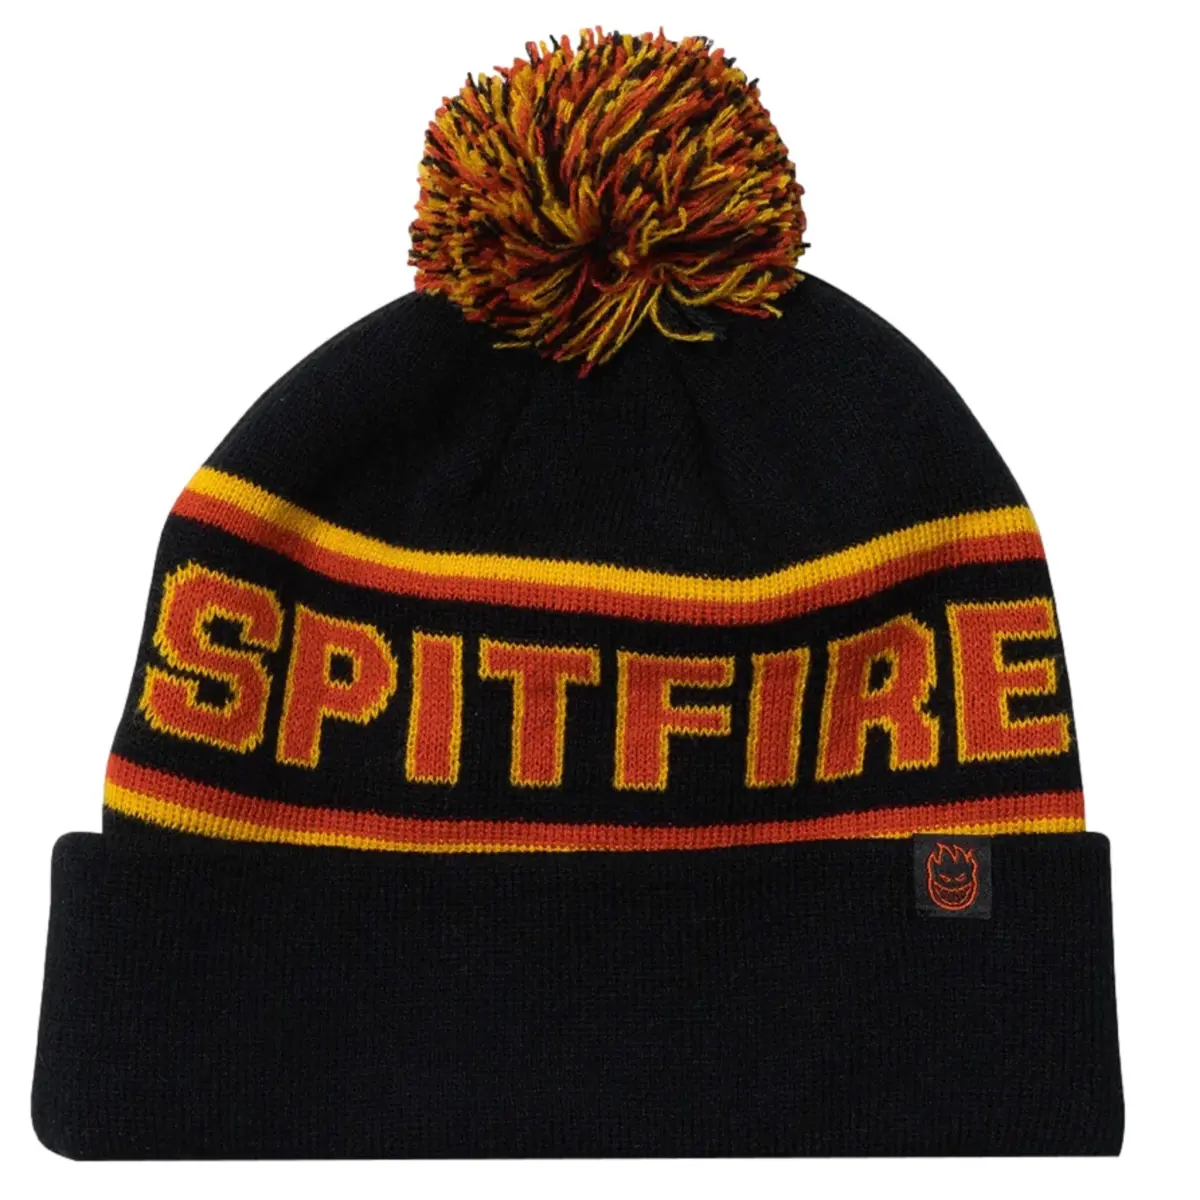 Spitfire beanie classic 87 fill pom black red and yellow